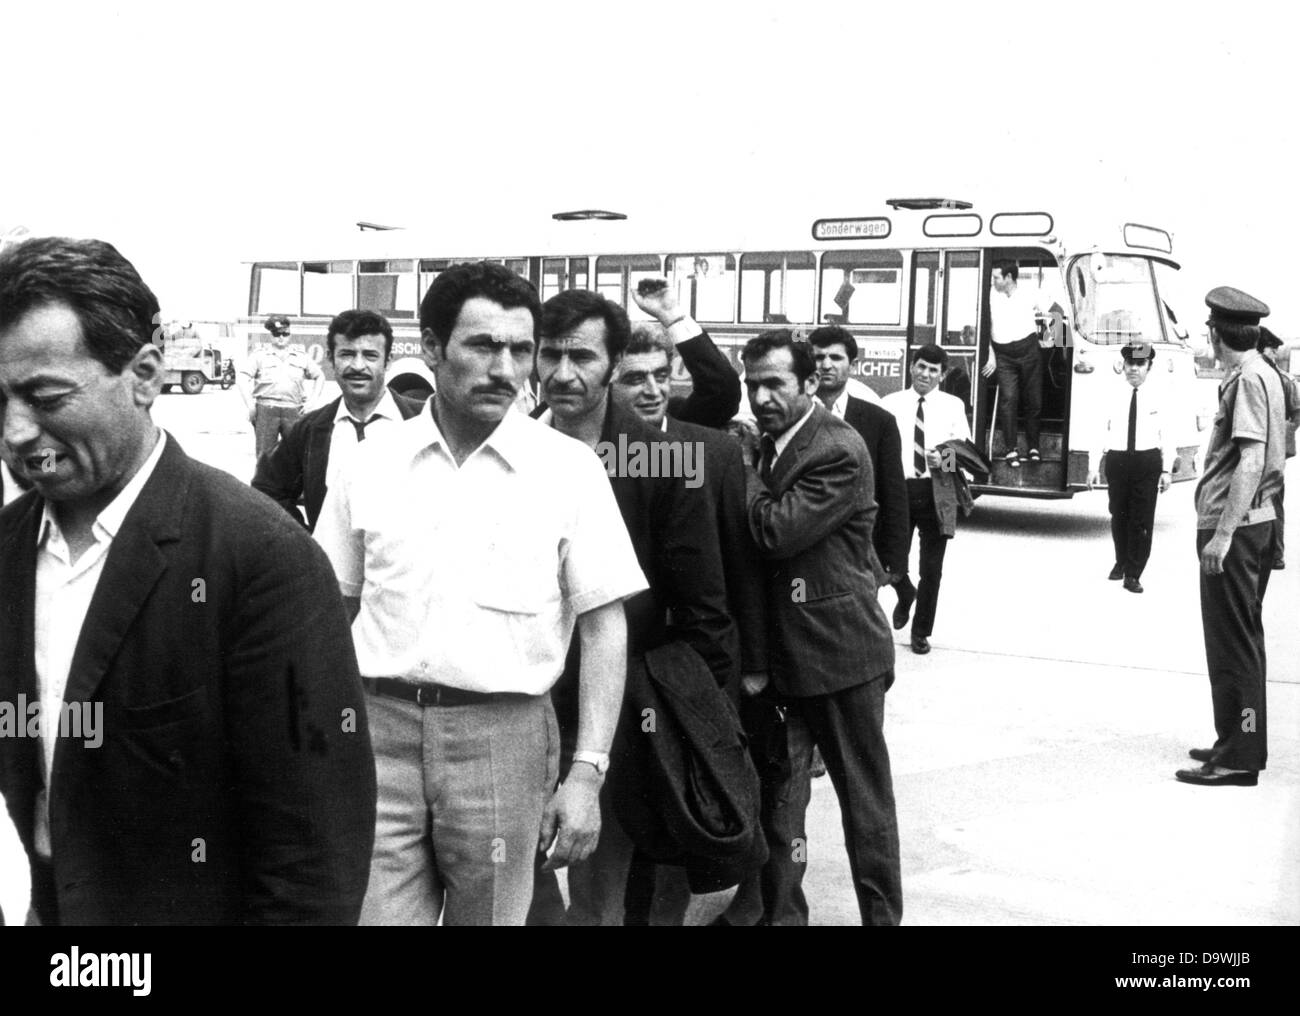 Seventy-six Turkish guest workers, who were arrested during a razzia in Duisburg on the 30th of July in 1970, are taken back to their home country on the 2nd of August in 1970. The Turkish guest workers had been immigrated illegally and did not have a working permission. Stock Photo